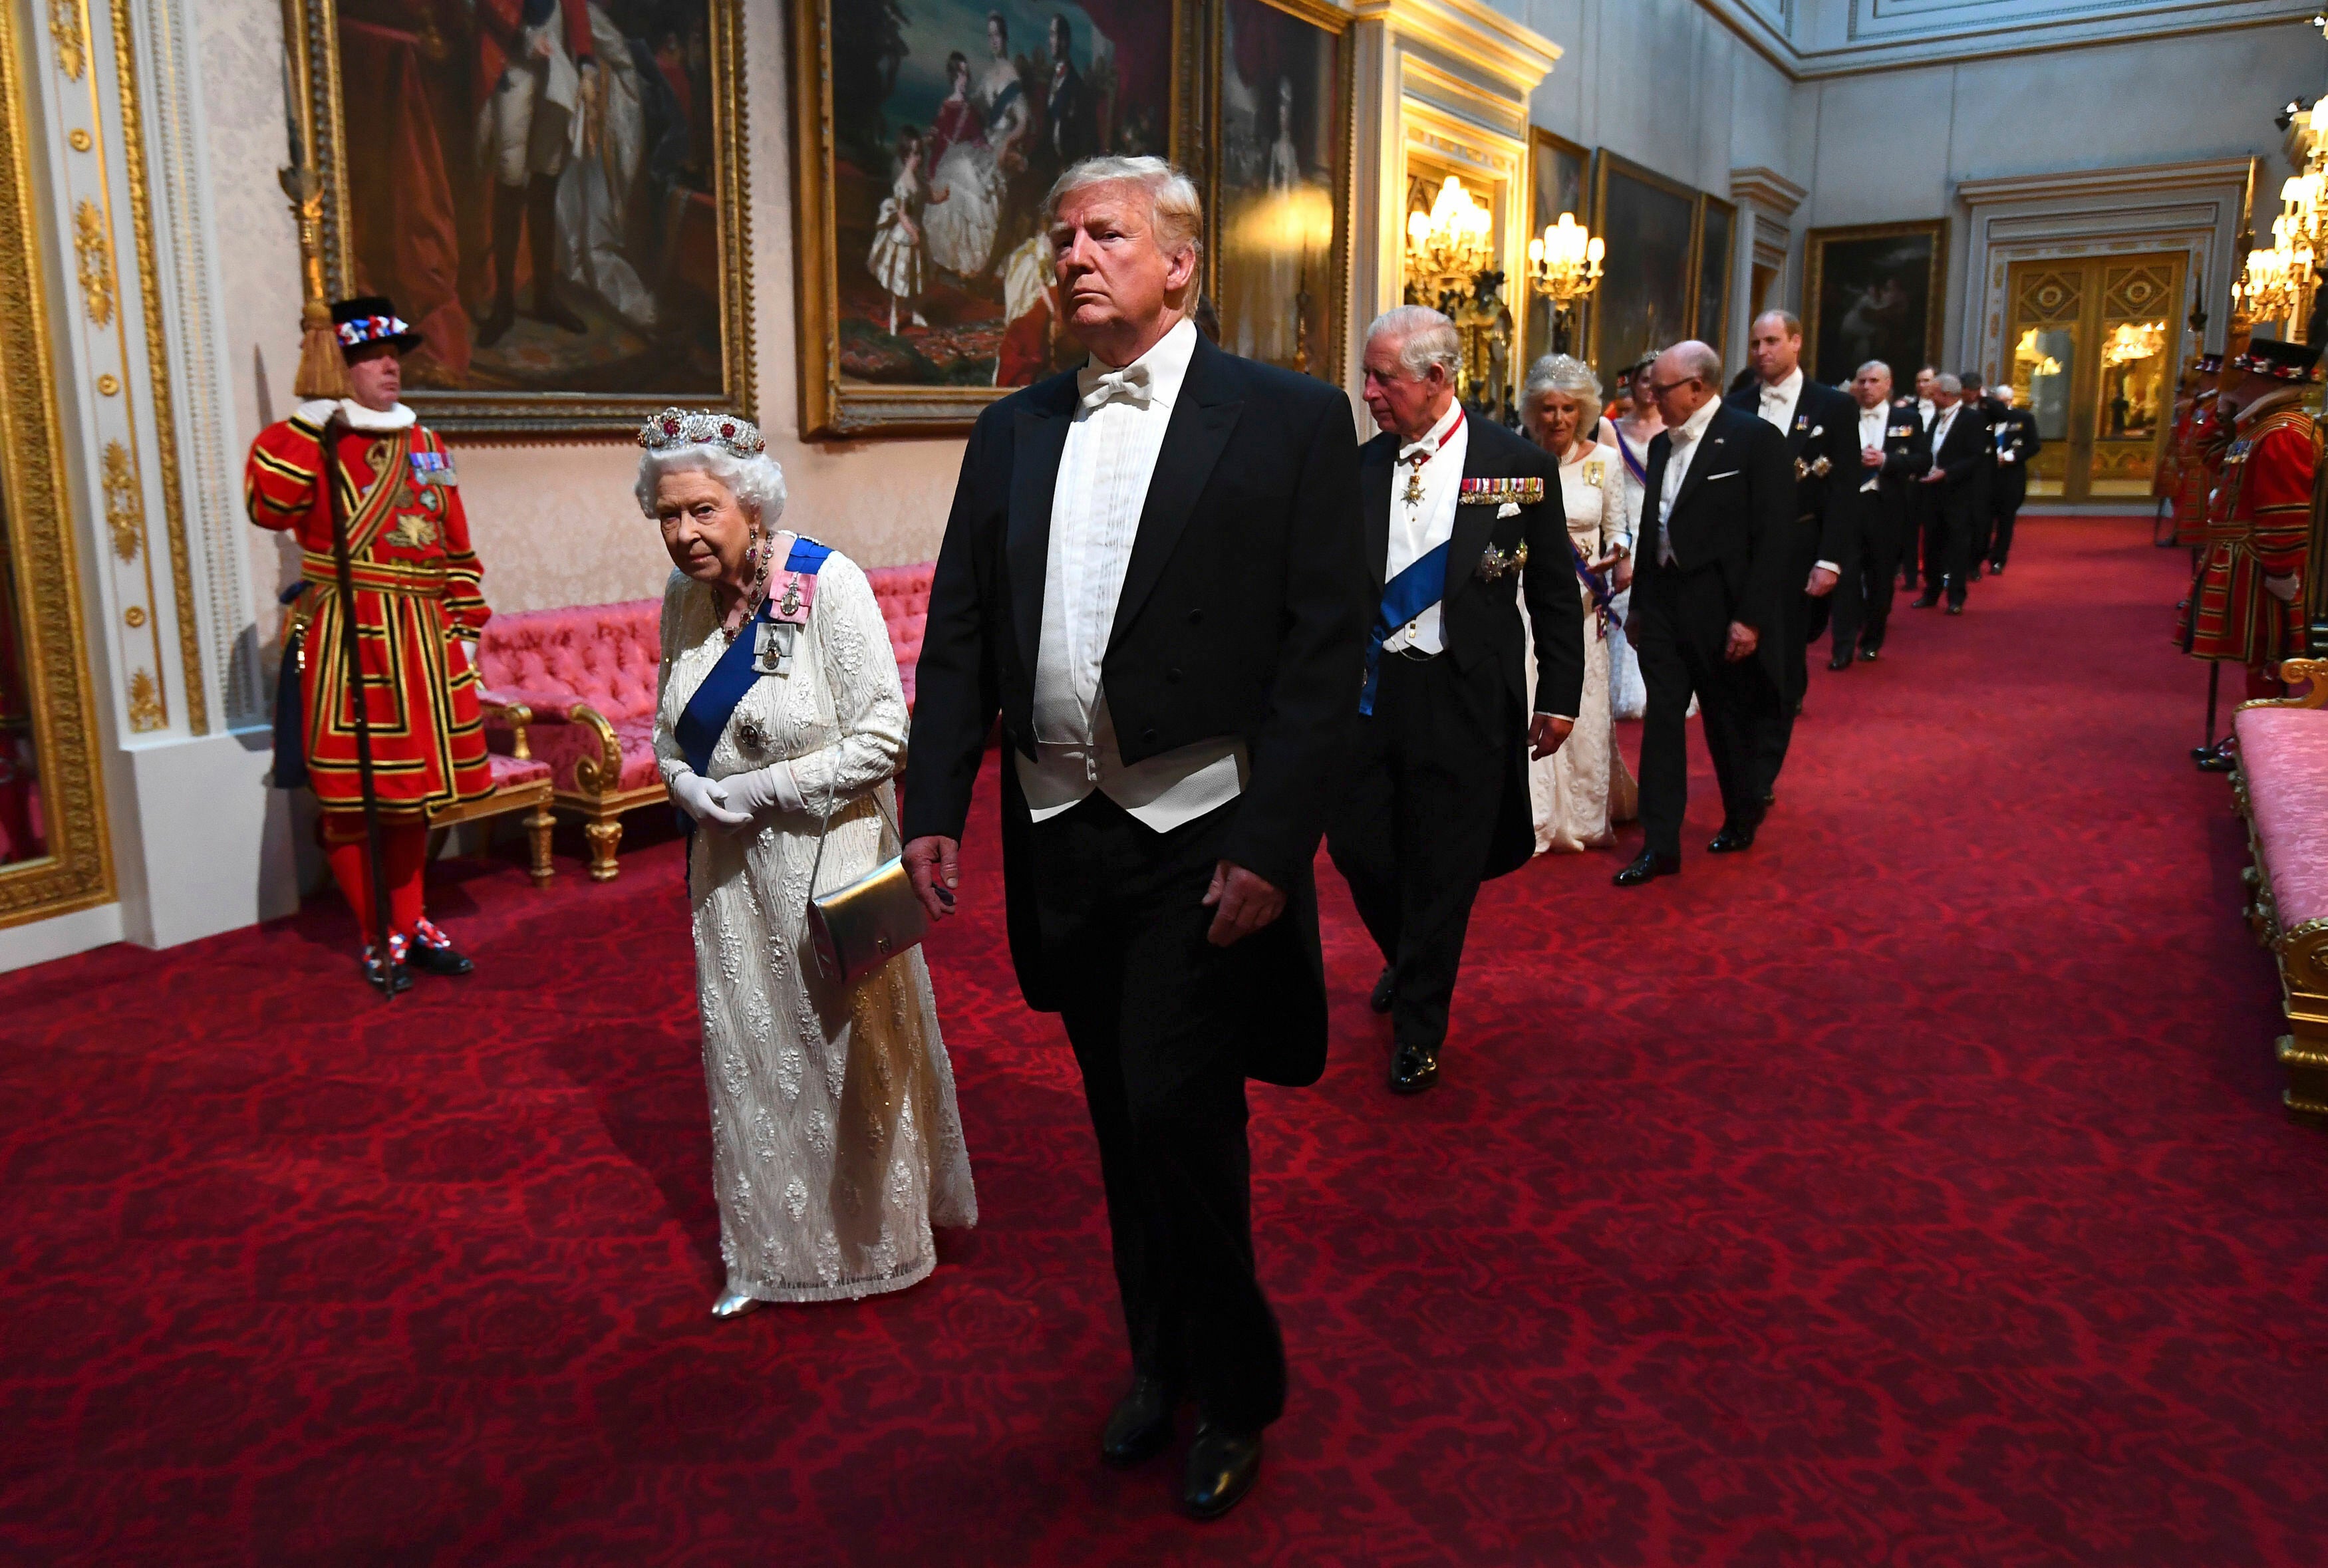 Queen Elizabeth II with then-President Trump at a state banquet at Buckingham Palace in 2019